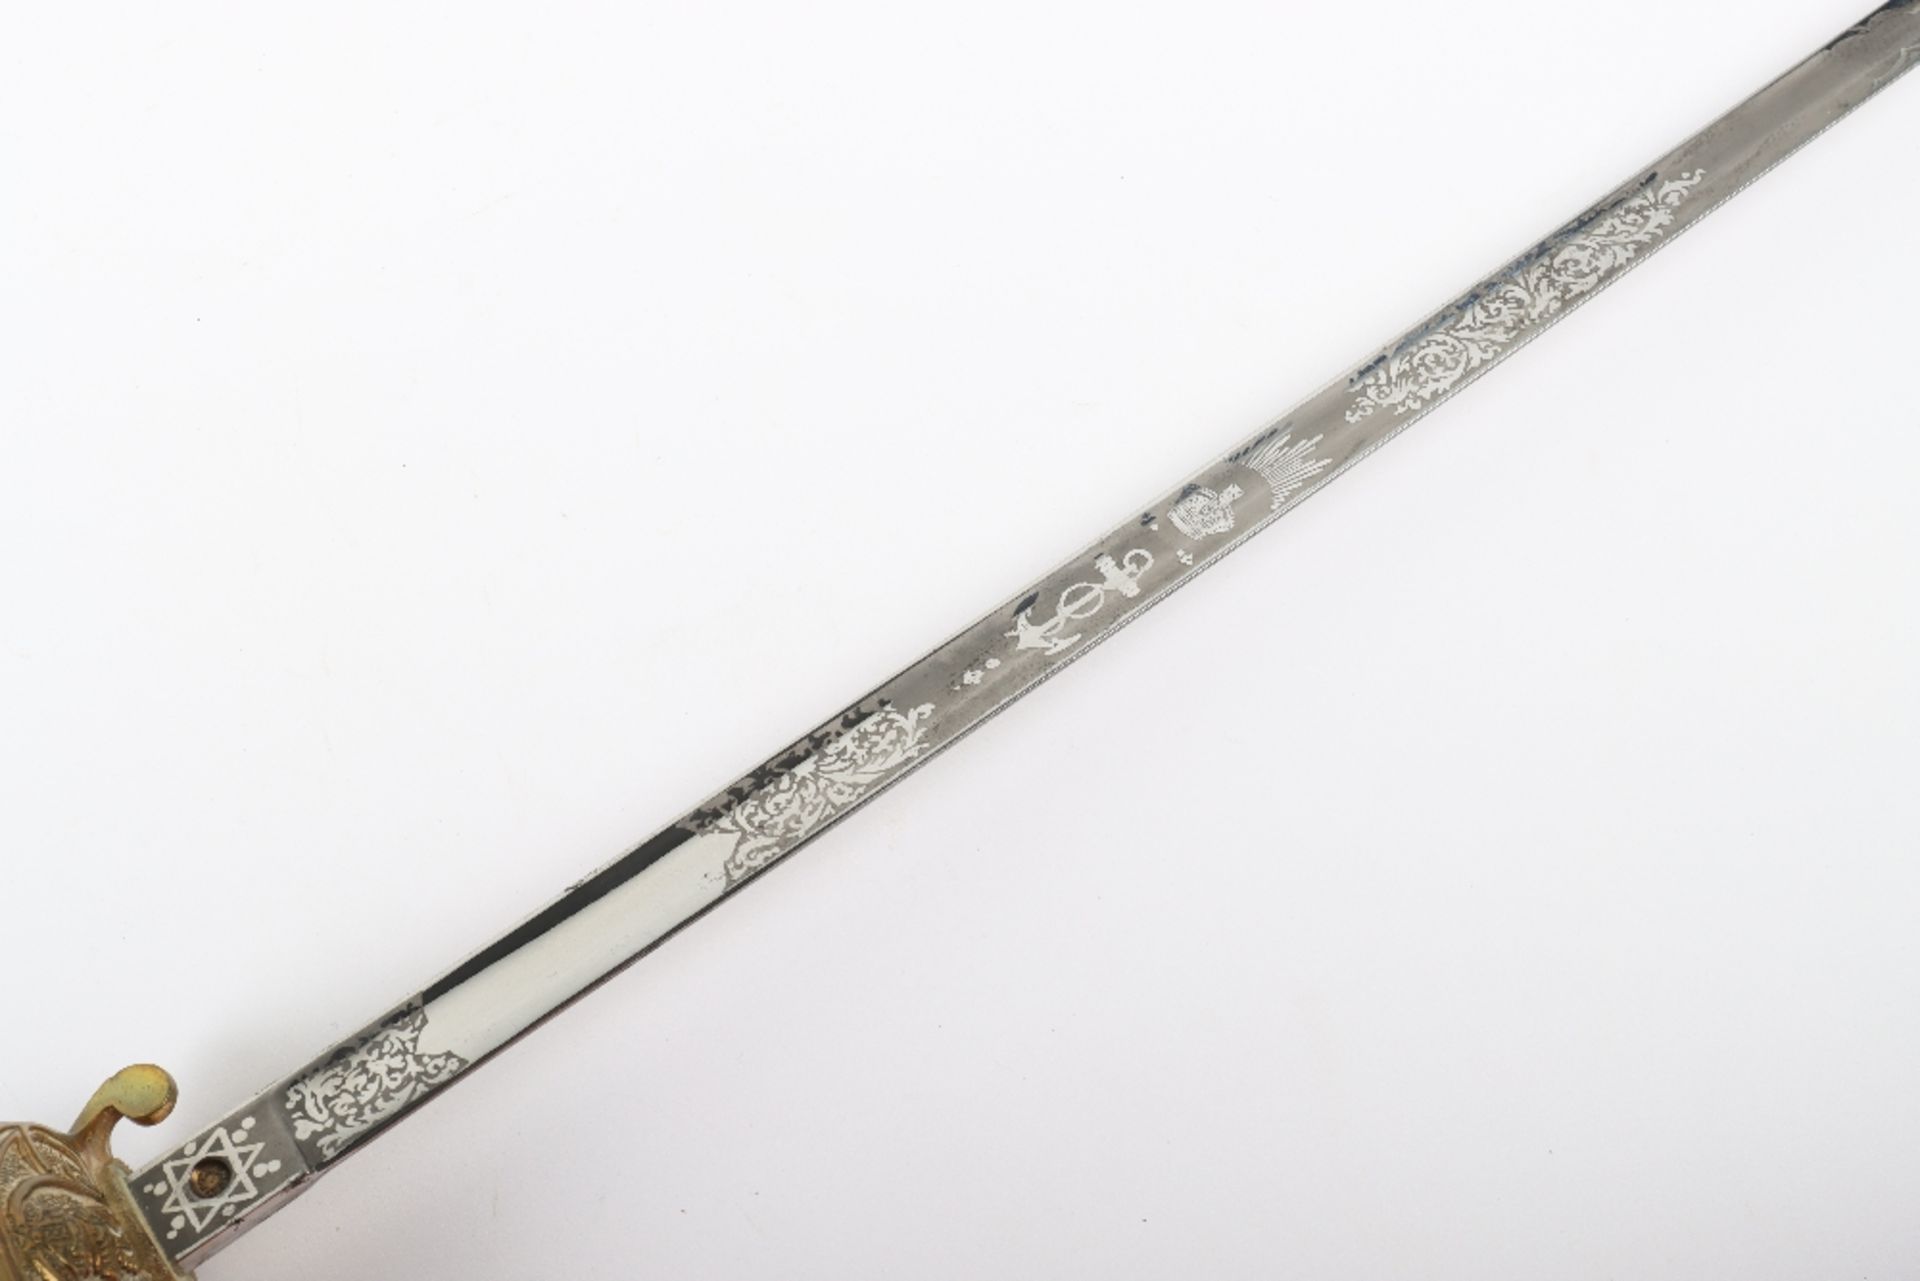 British George VI Naval Officers Sword by S W Silver and Co - Image 8 of 14